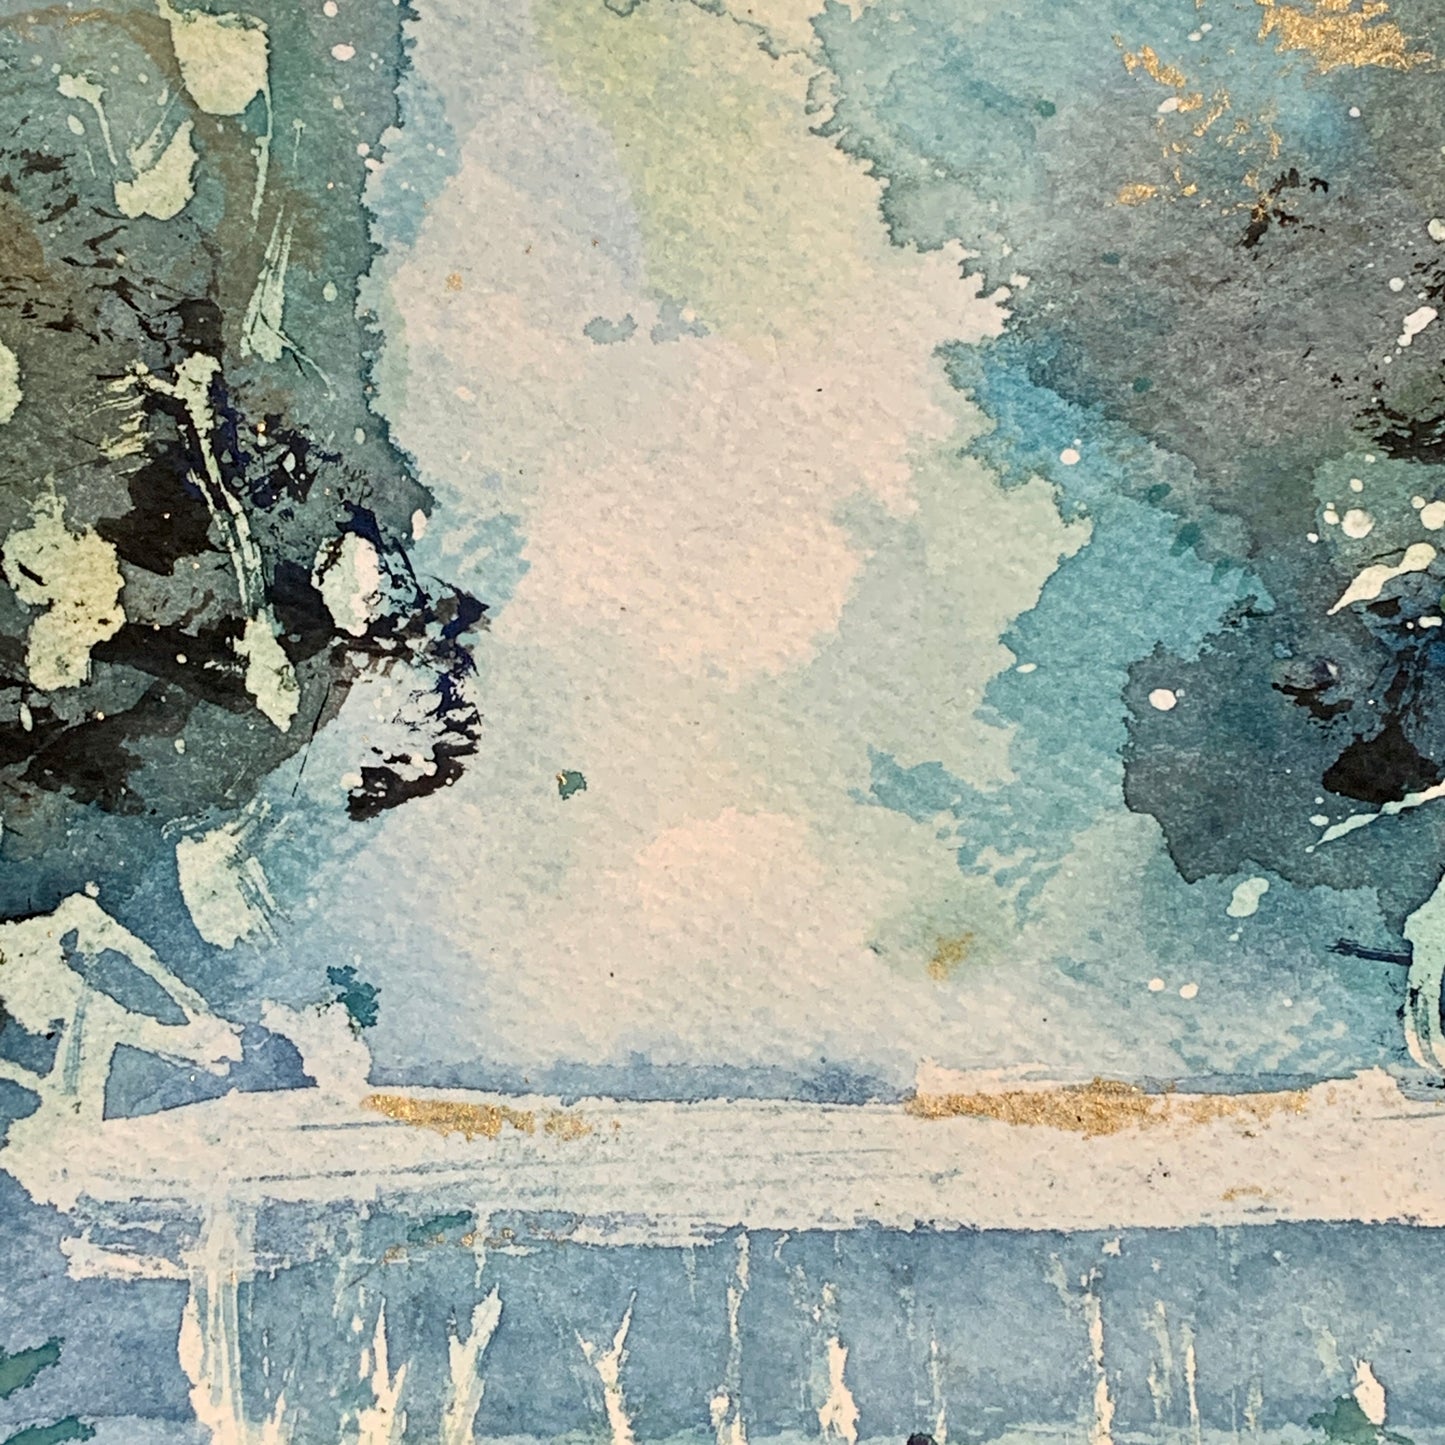 Water, Trees and Mist on the way Home (Original, Signed and Framed)